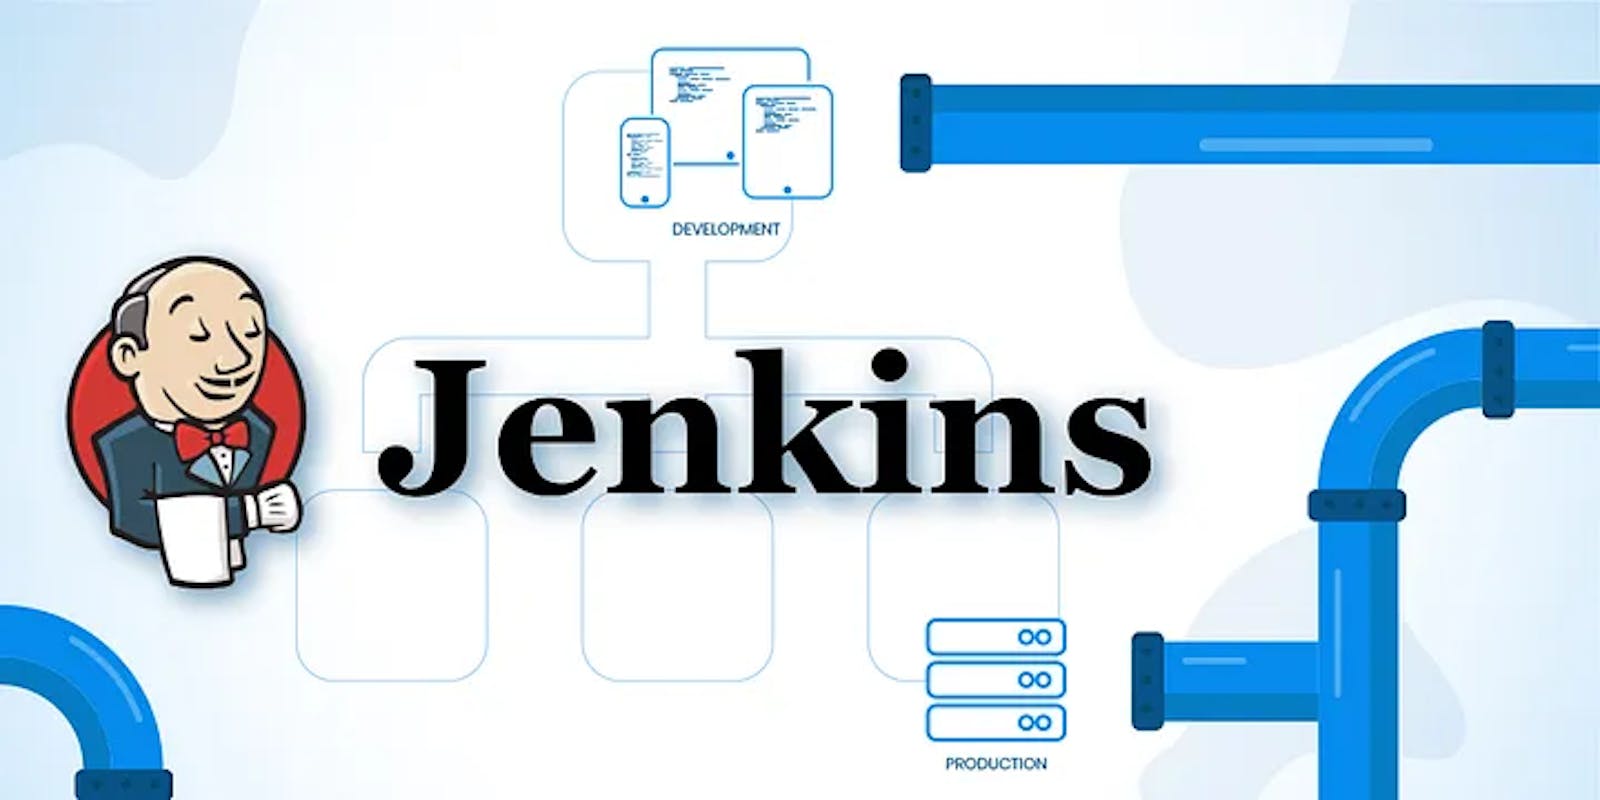 How to Grant Jenkins User Root or Administrative Privileges Without a Password